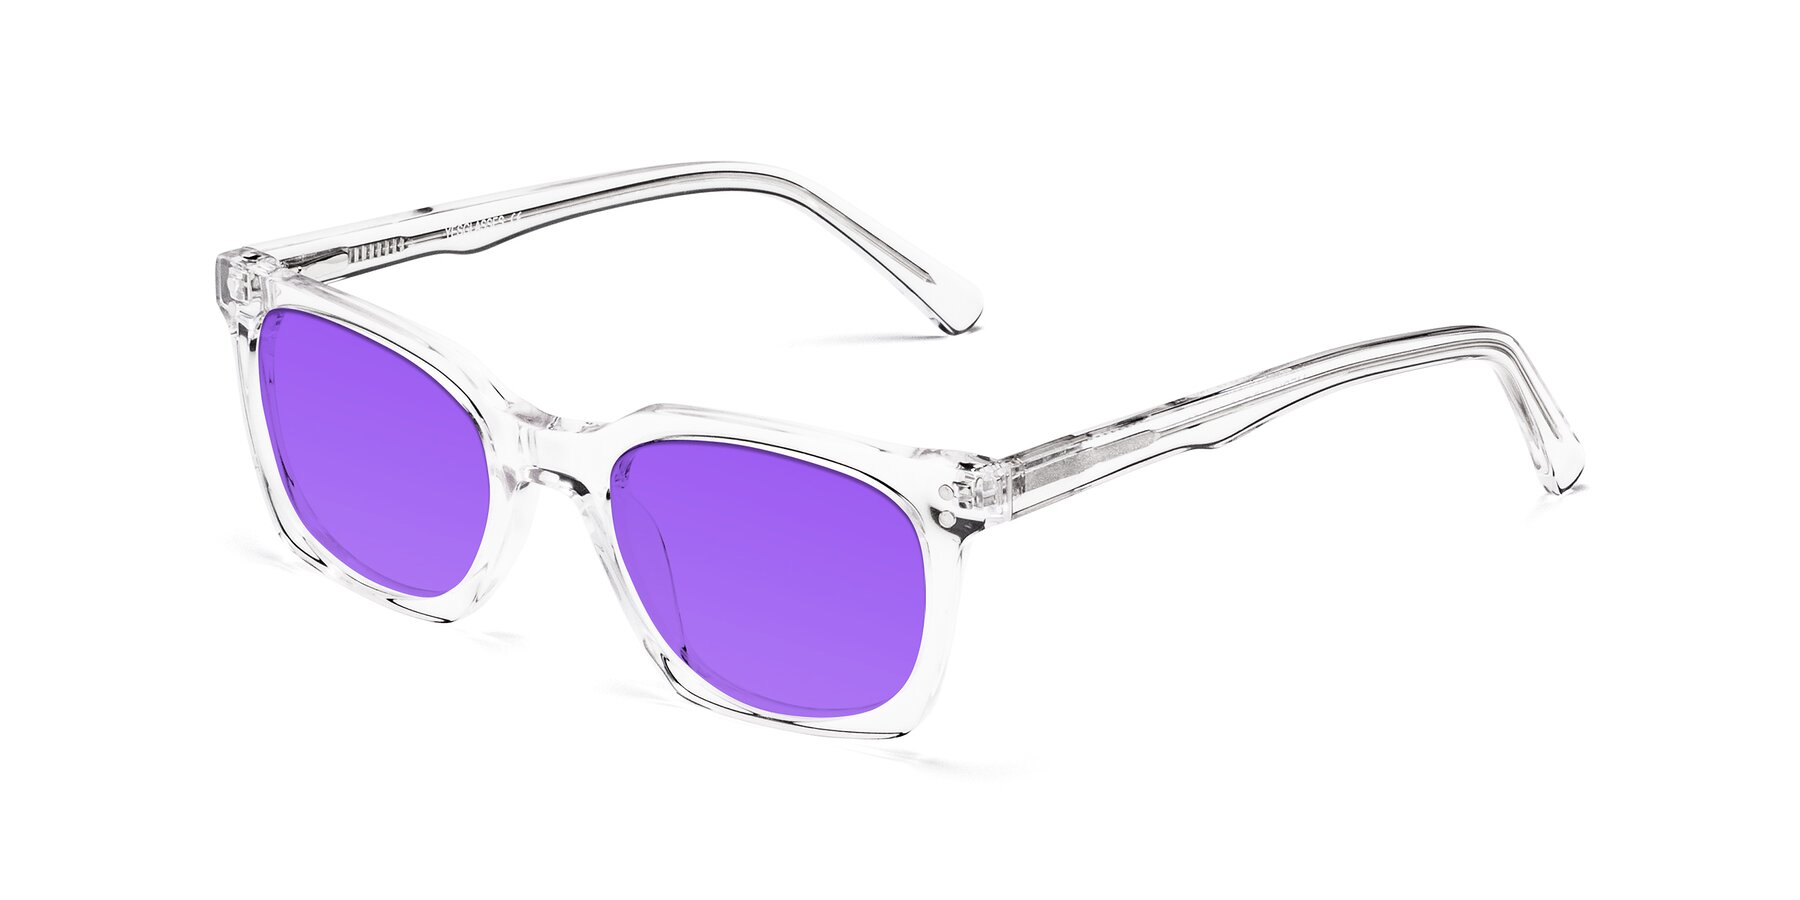 Clear Thick Geek-Chic Geometric Tinted Sunglasses